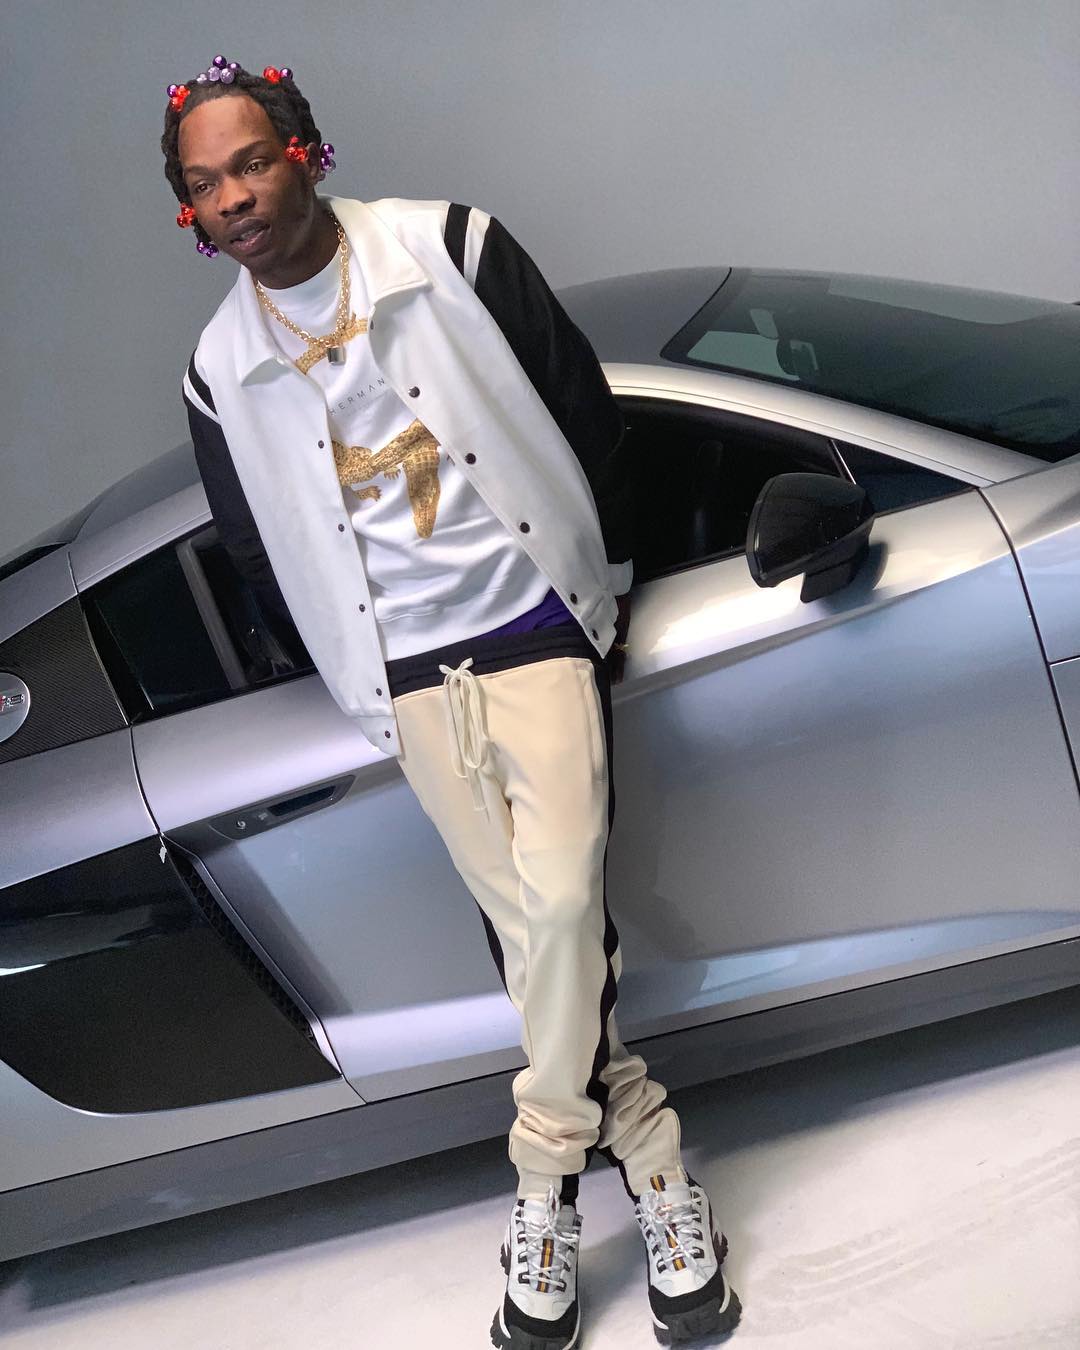 Naira Marley drops new song “Why” before showing up in court